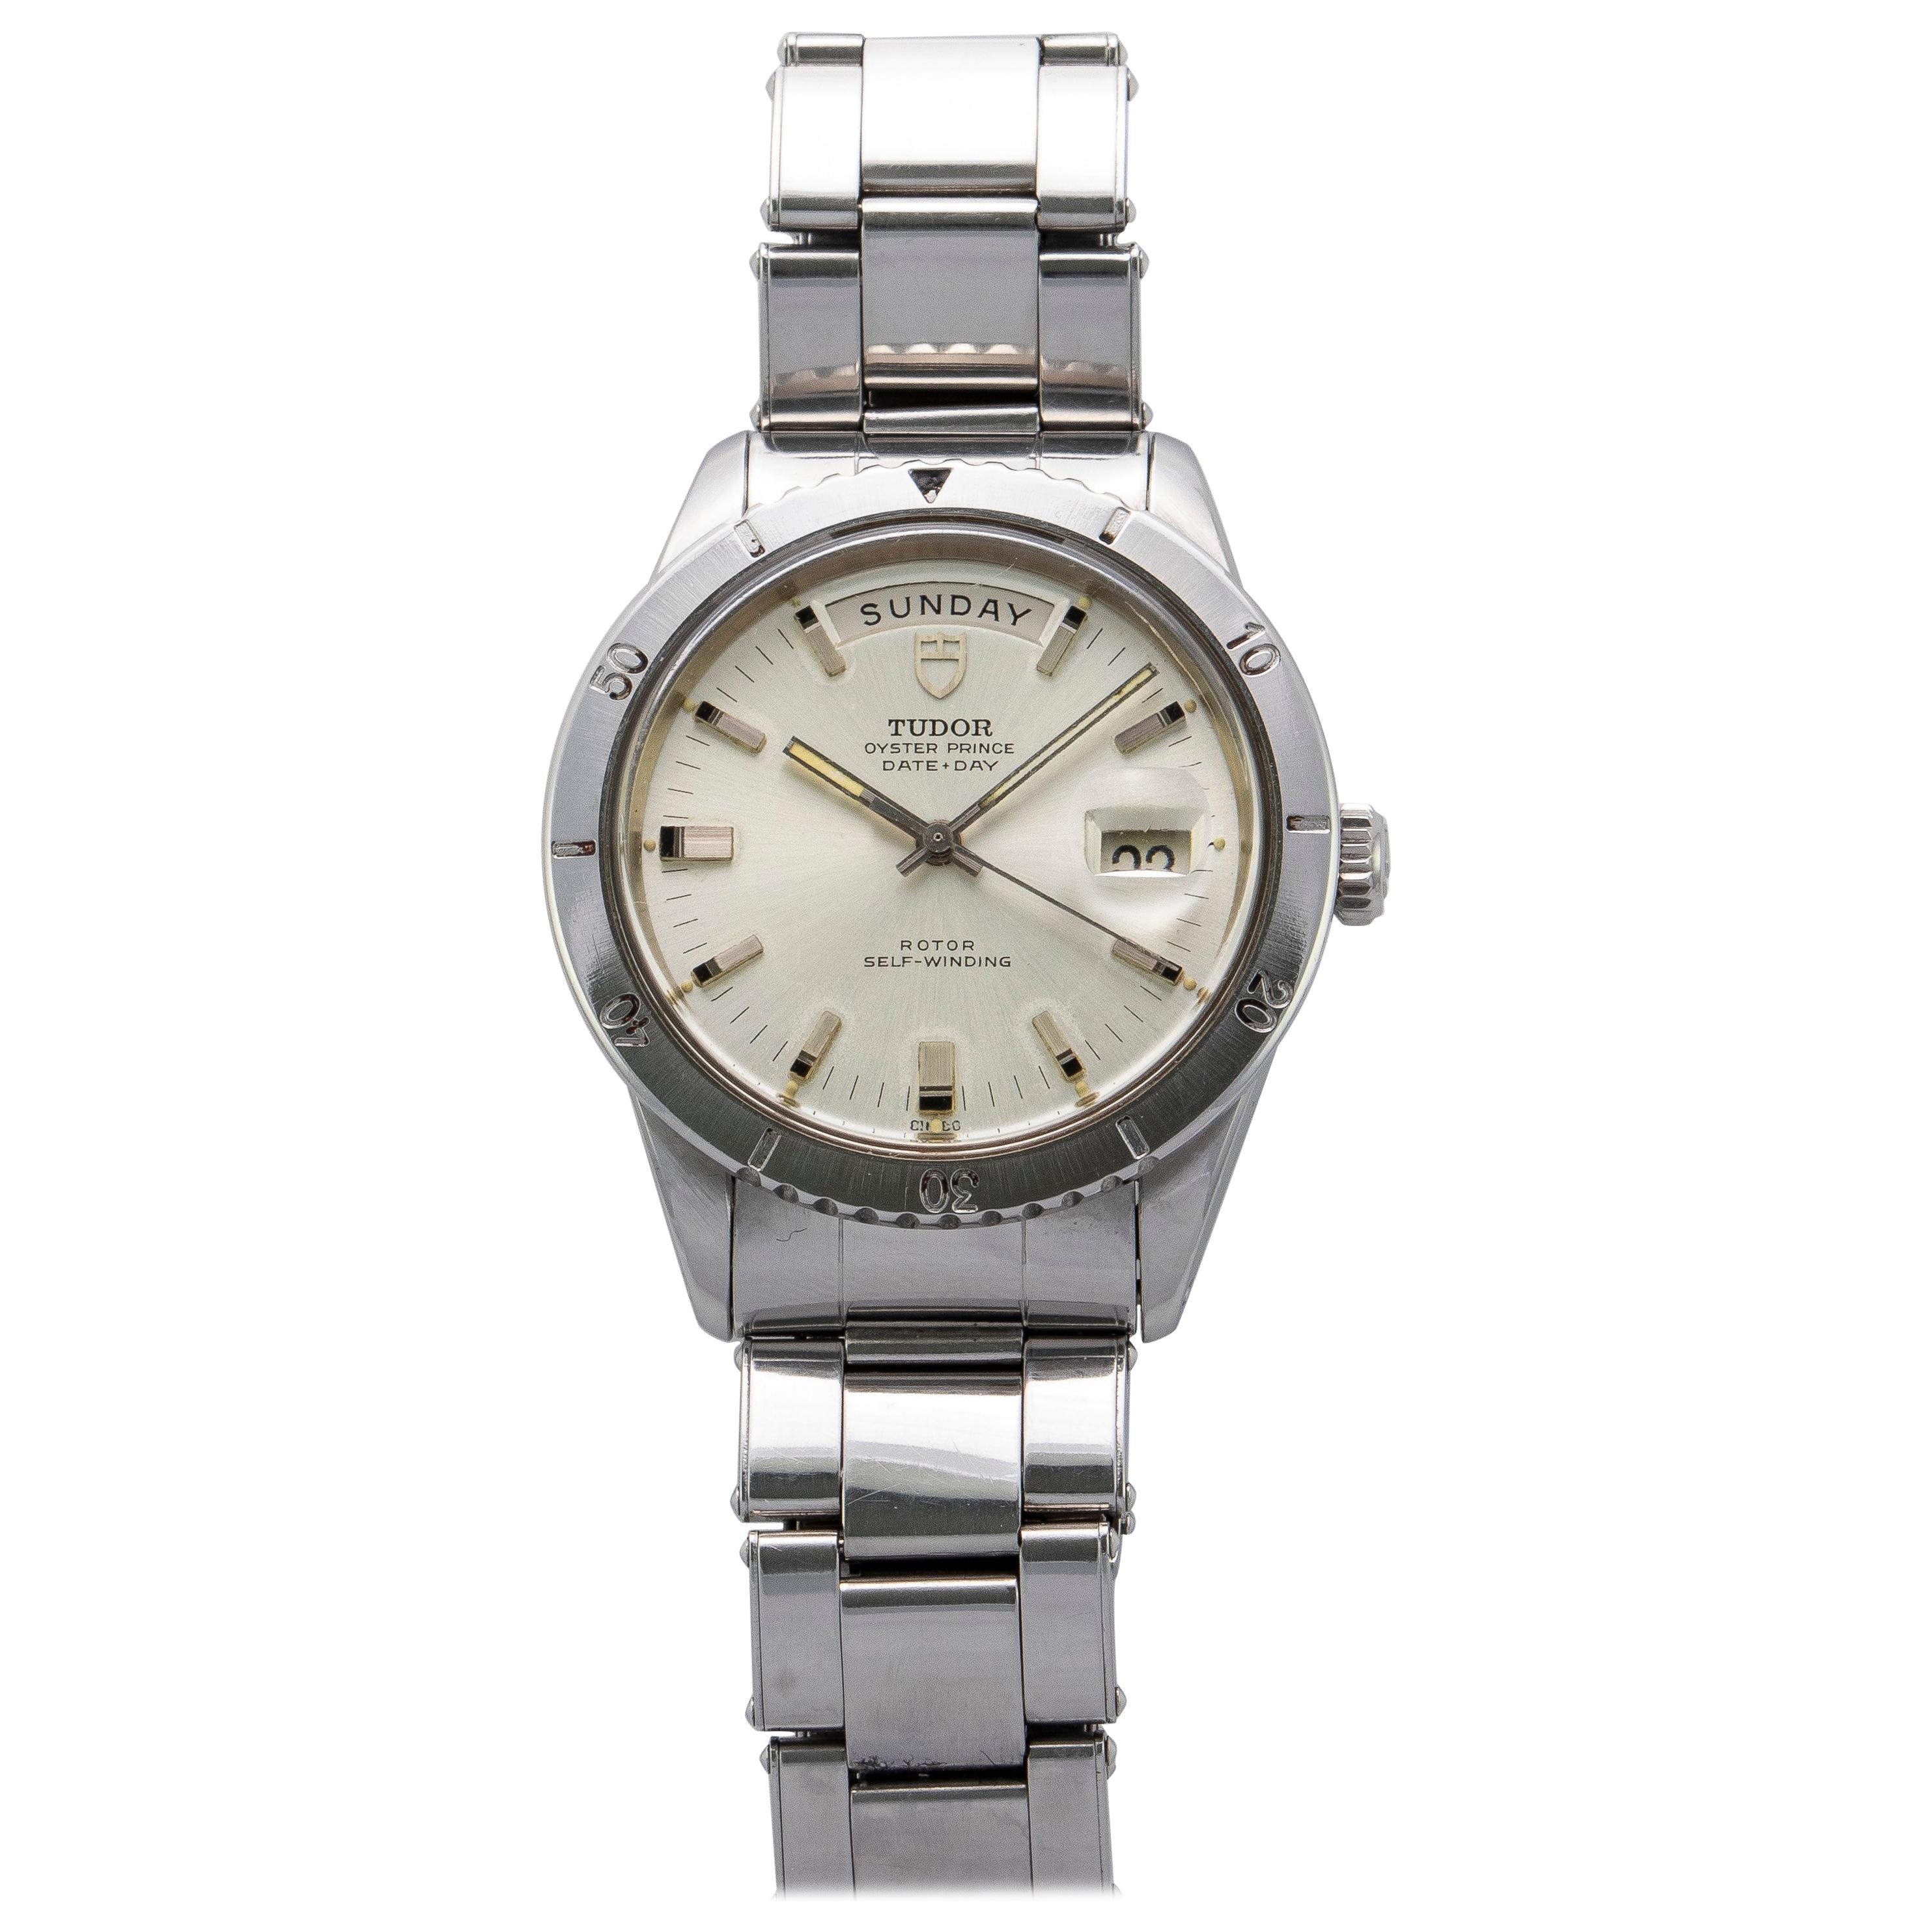 Tudor Stainless Steel Oyster Prince Date Automatic Watch, 1960s